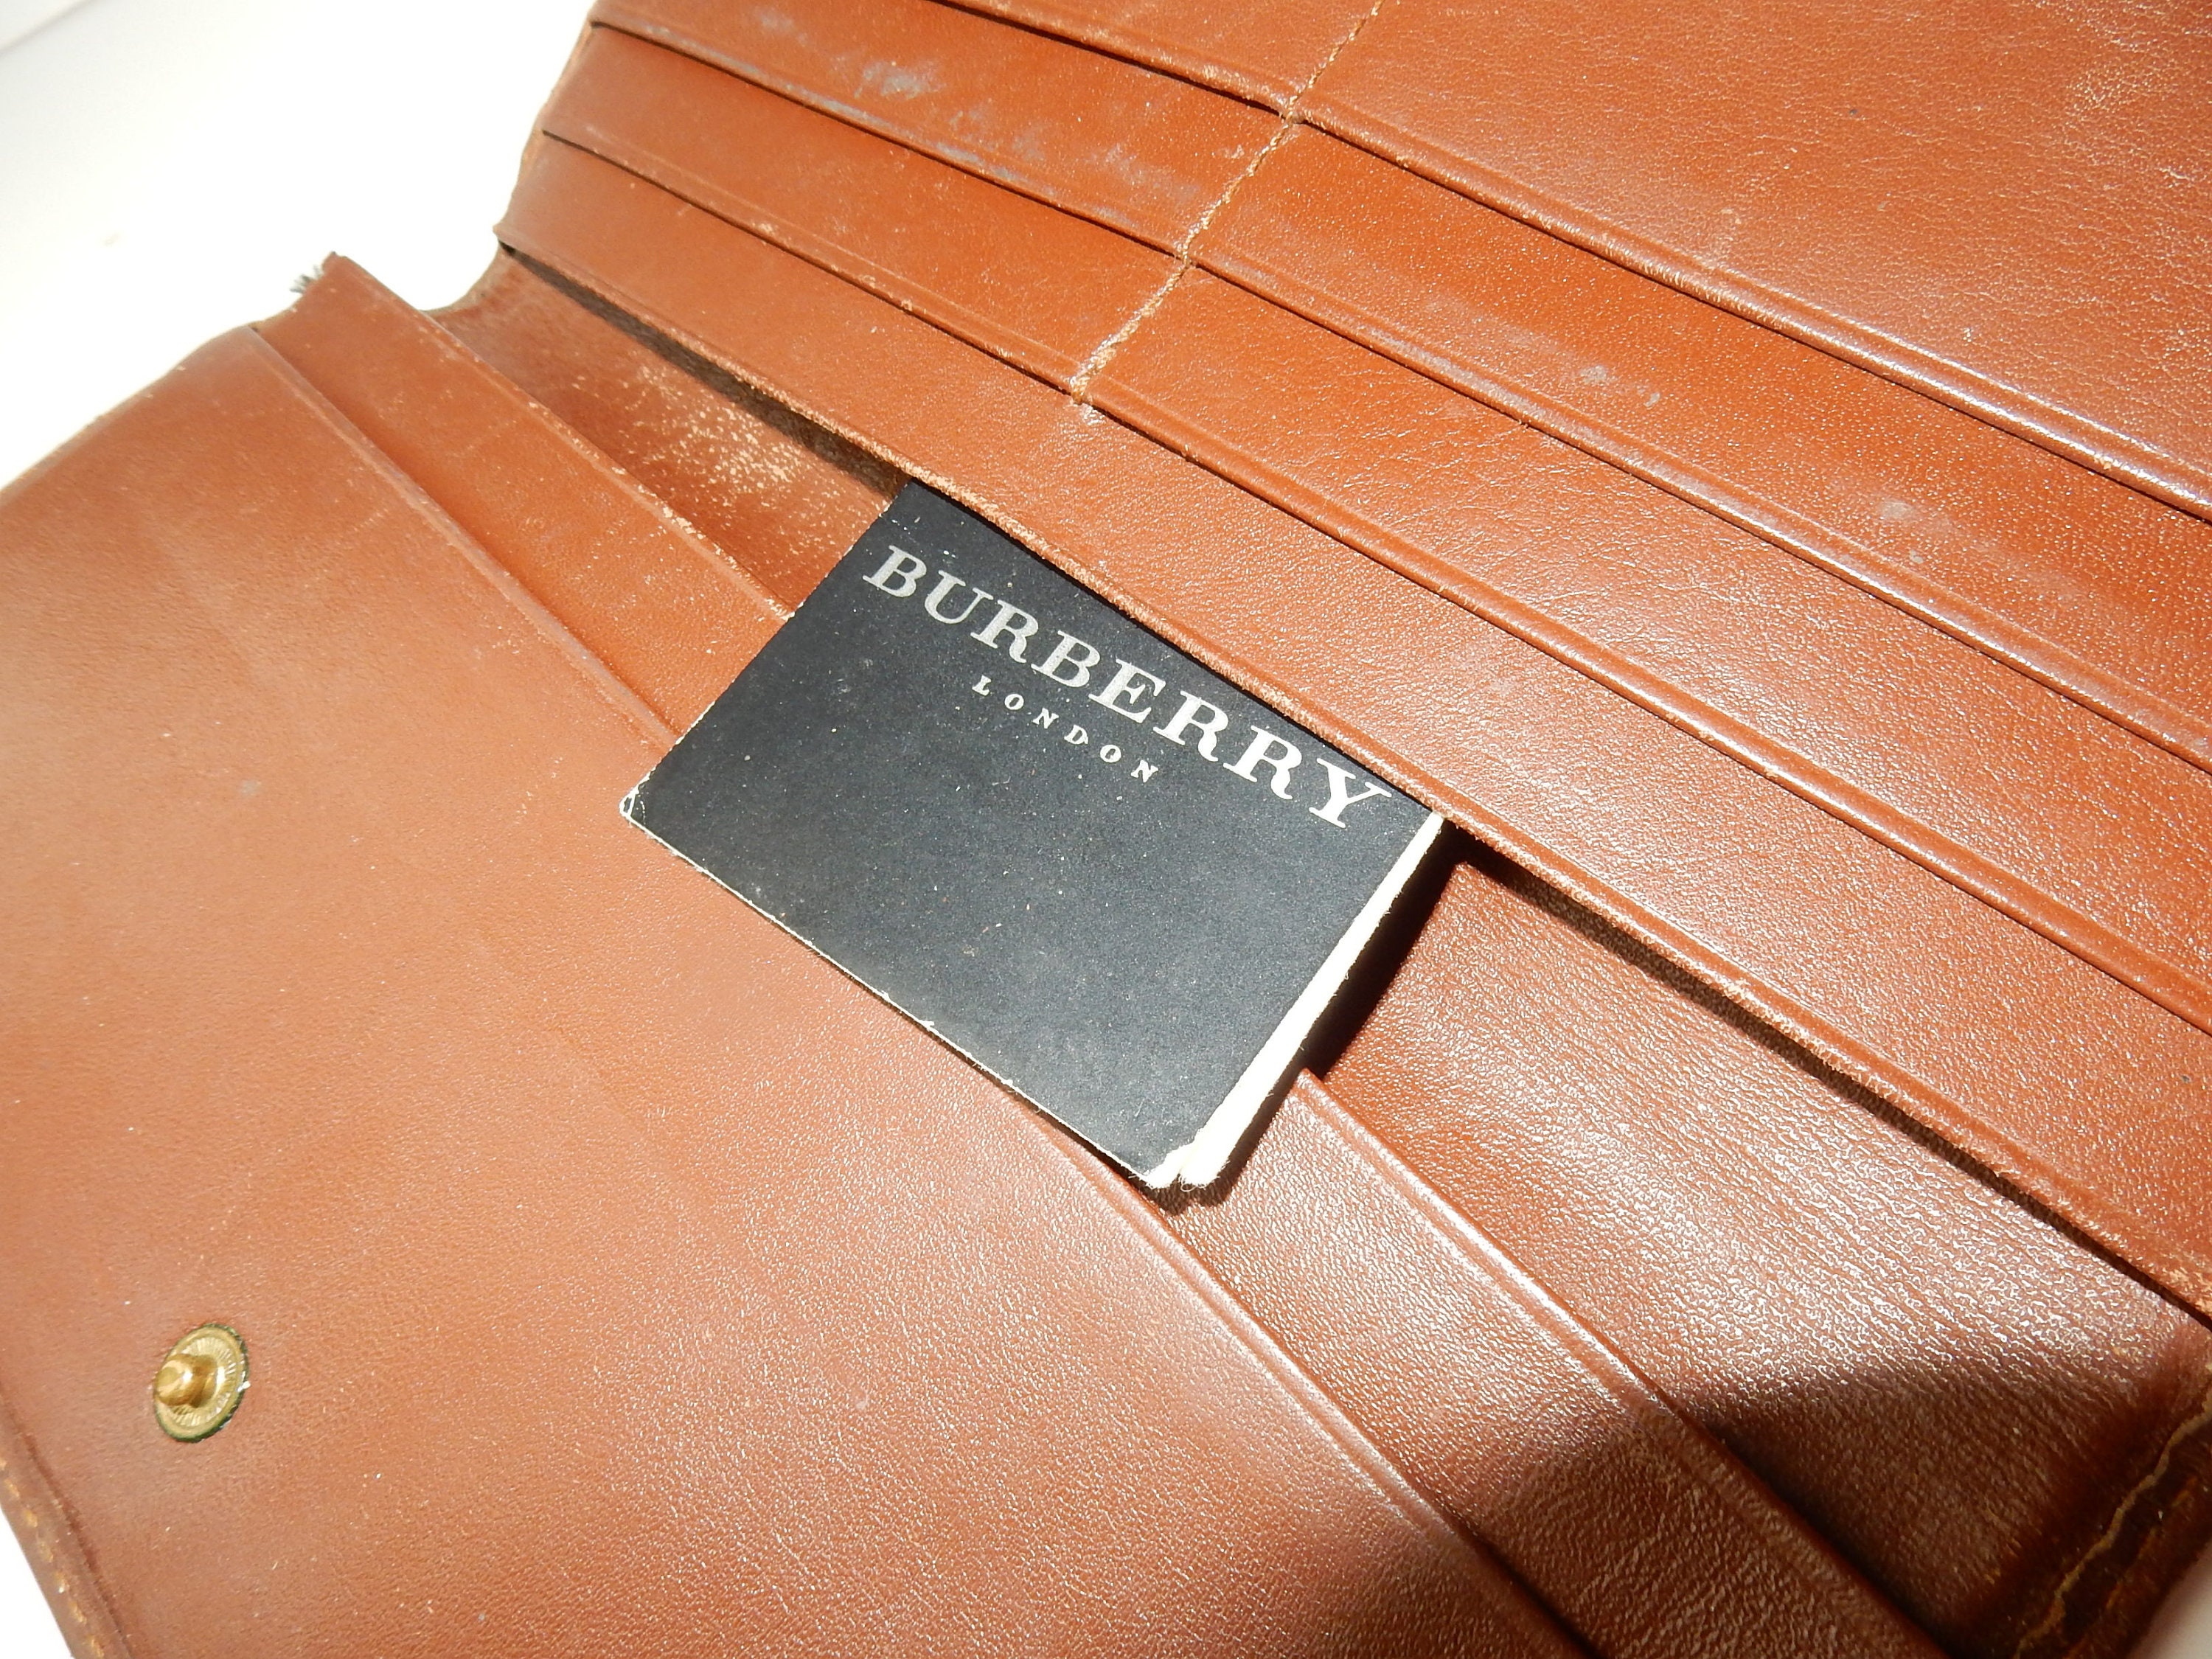 Burberry hand bag real vs fake review. How to spot counterfeit Burberry  London bag 